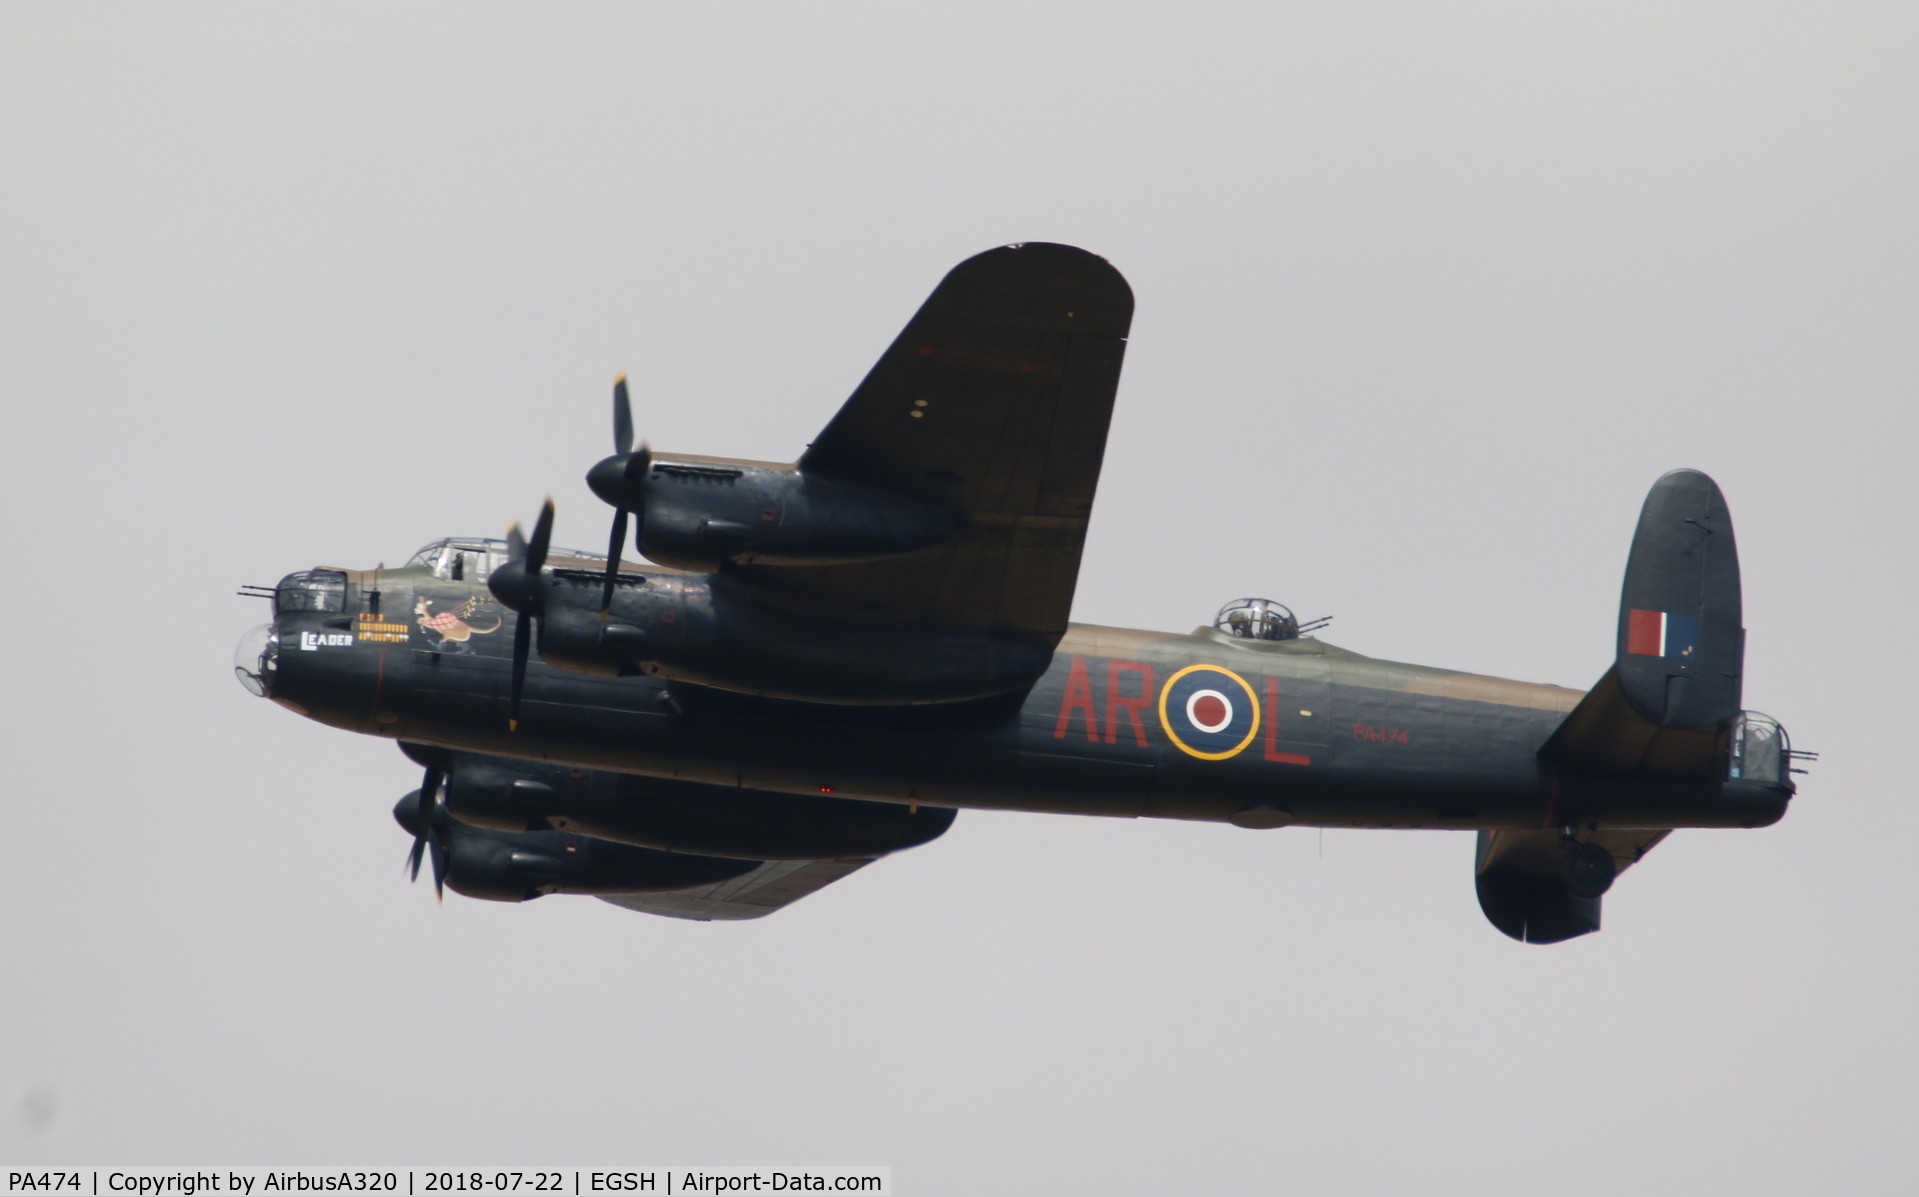 PA474, 1945 Avro 683 Lancaster B1 C/N VACH0052/D2973, Performing a fly past over Norwich Airport